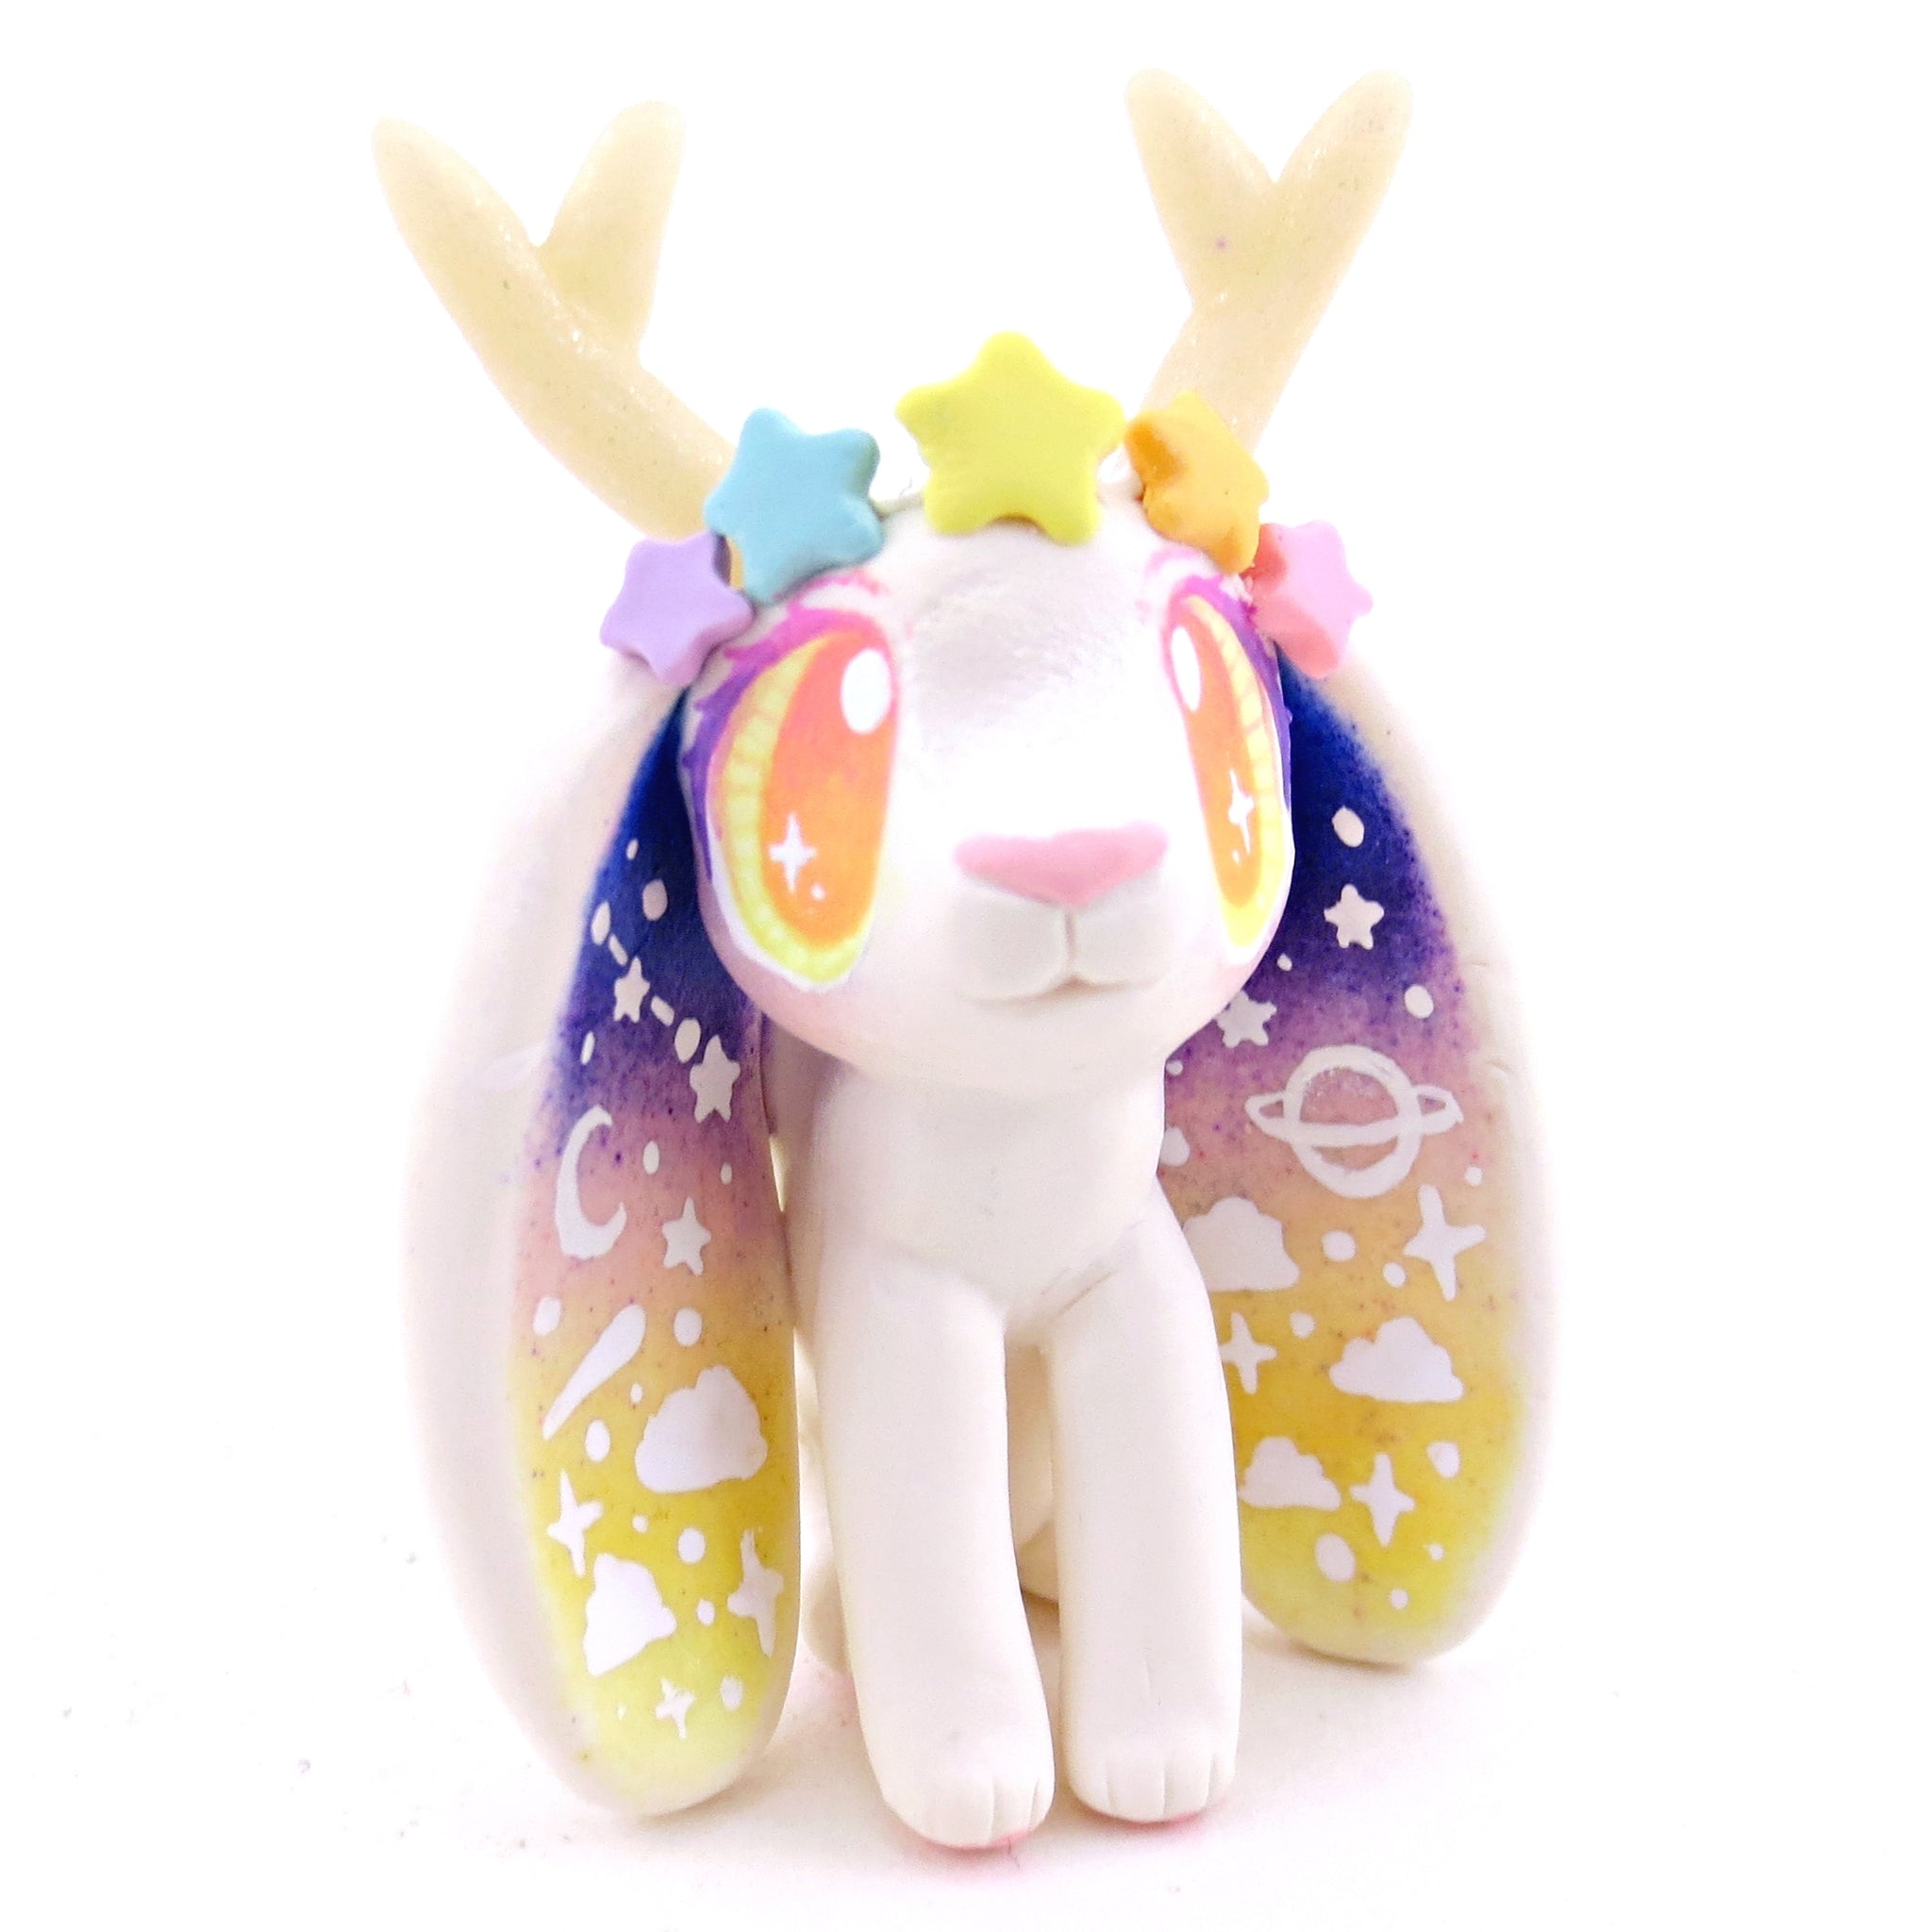 Galaxy Ears Jackalope Wolpertinger Figurine - Version 2 - Polymer Clay Magical Creatures